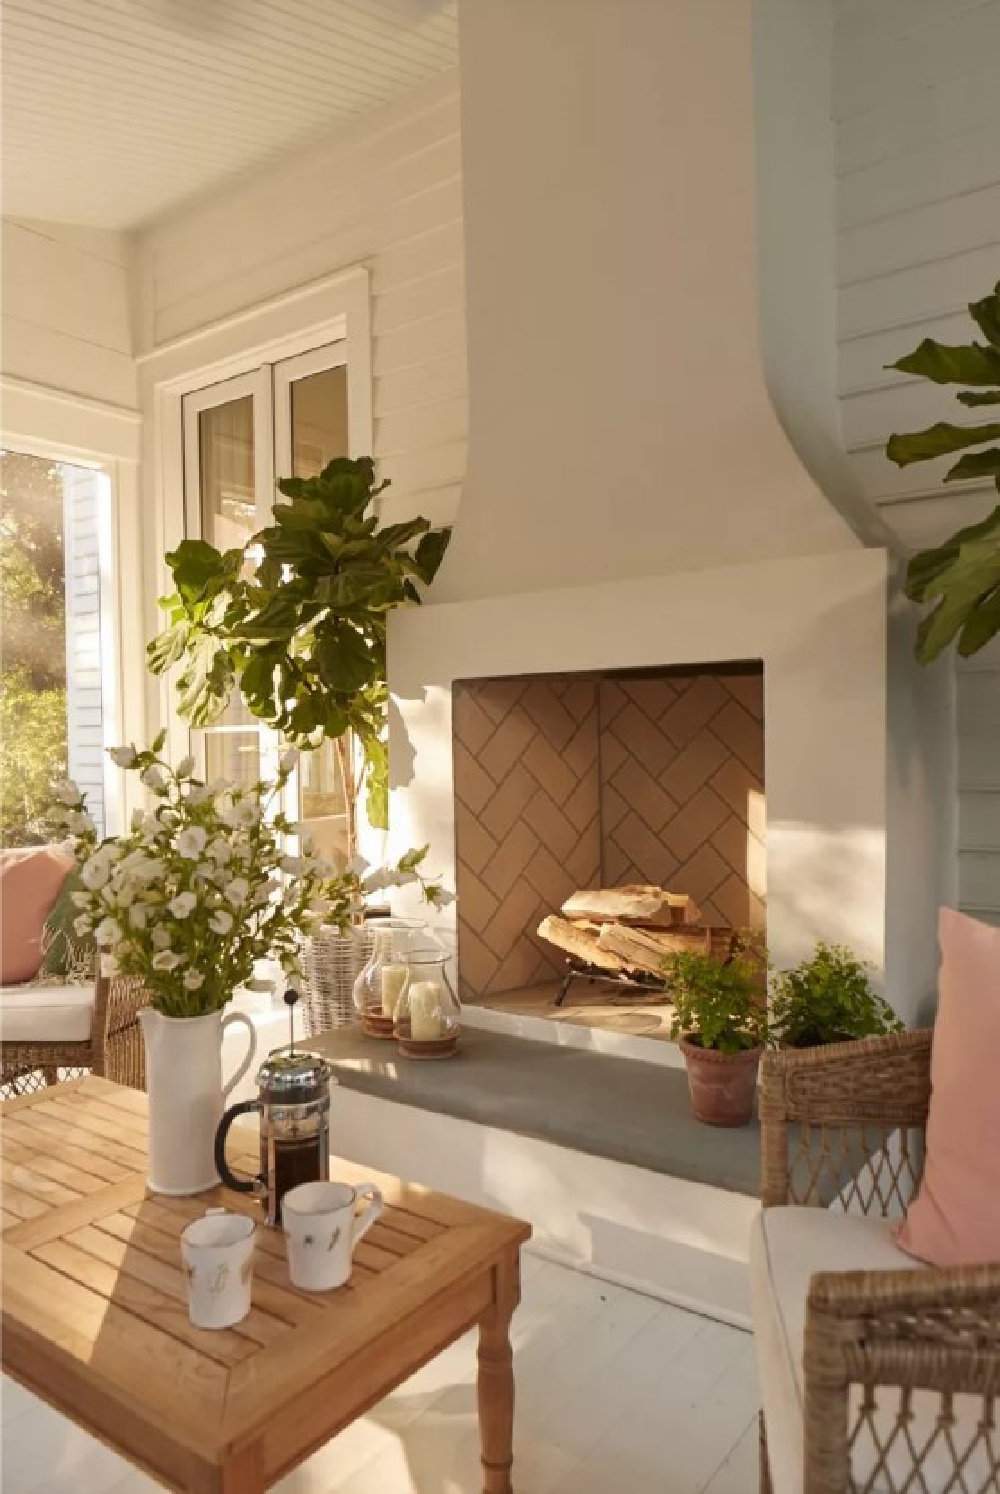 Screen porch with fireplace in charming Charleston home - Julia Berolzheimer's home in Southern Living (photo: Hector Manuel Sanchez). #screenporchdesign